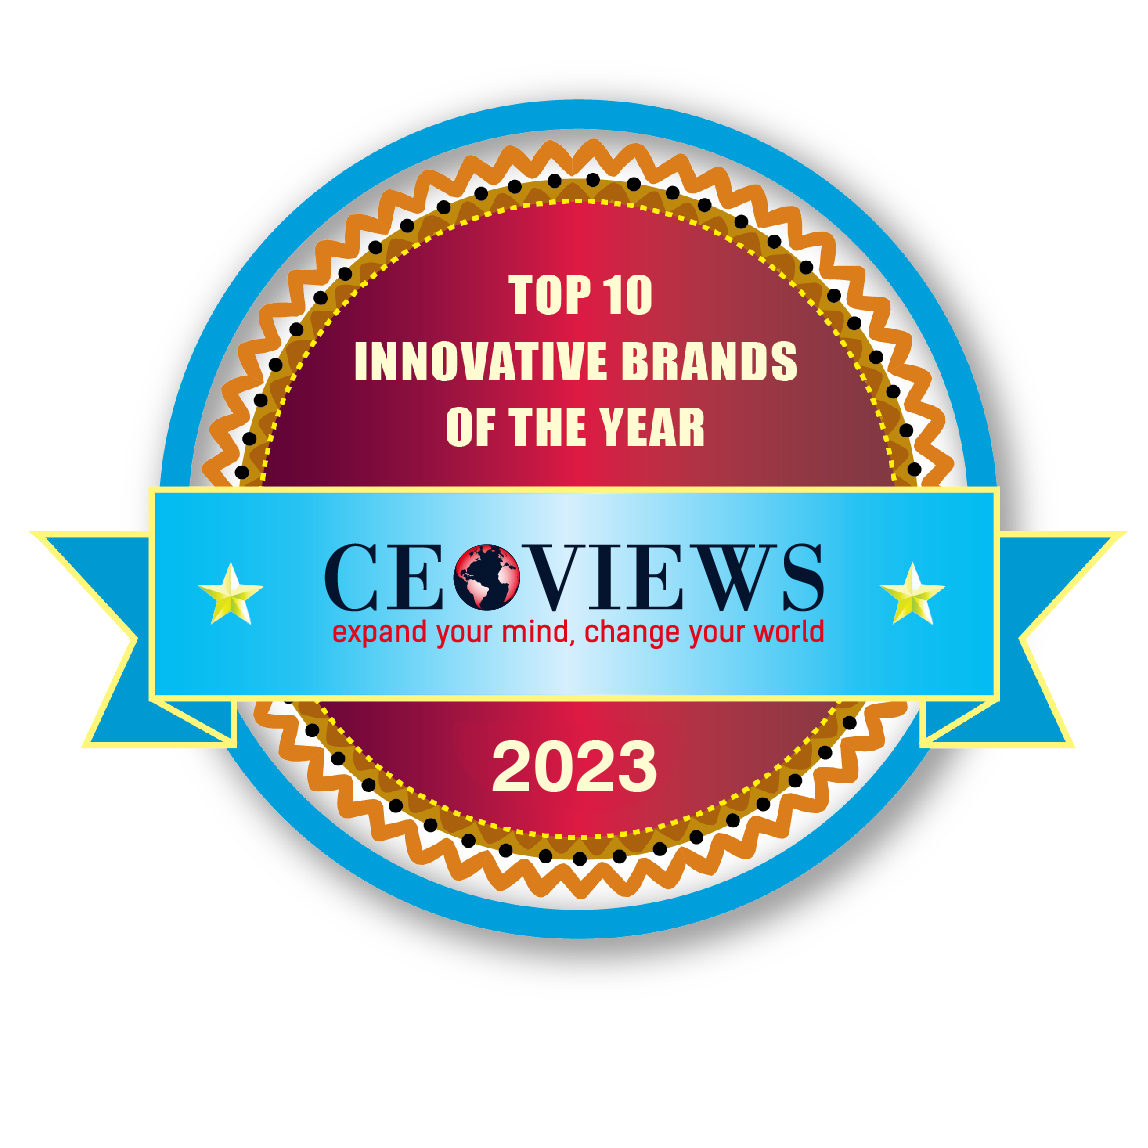 Top 10 innovative brands of the year 2023